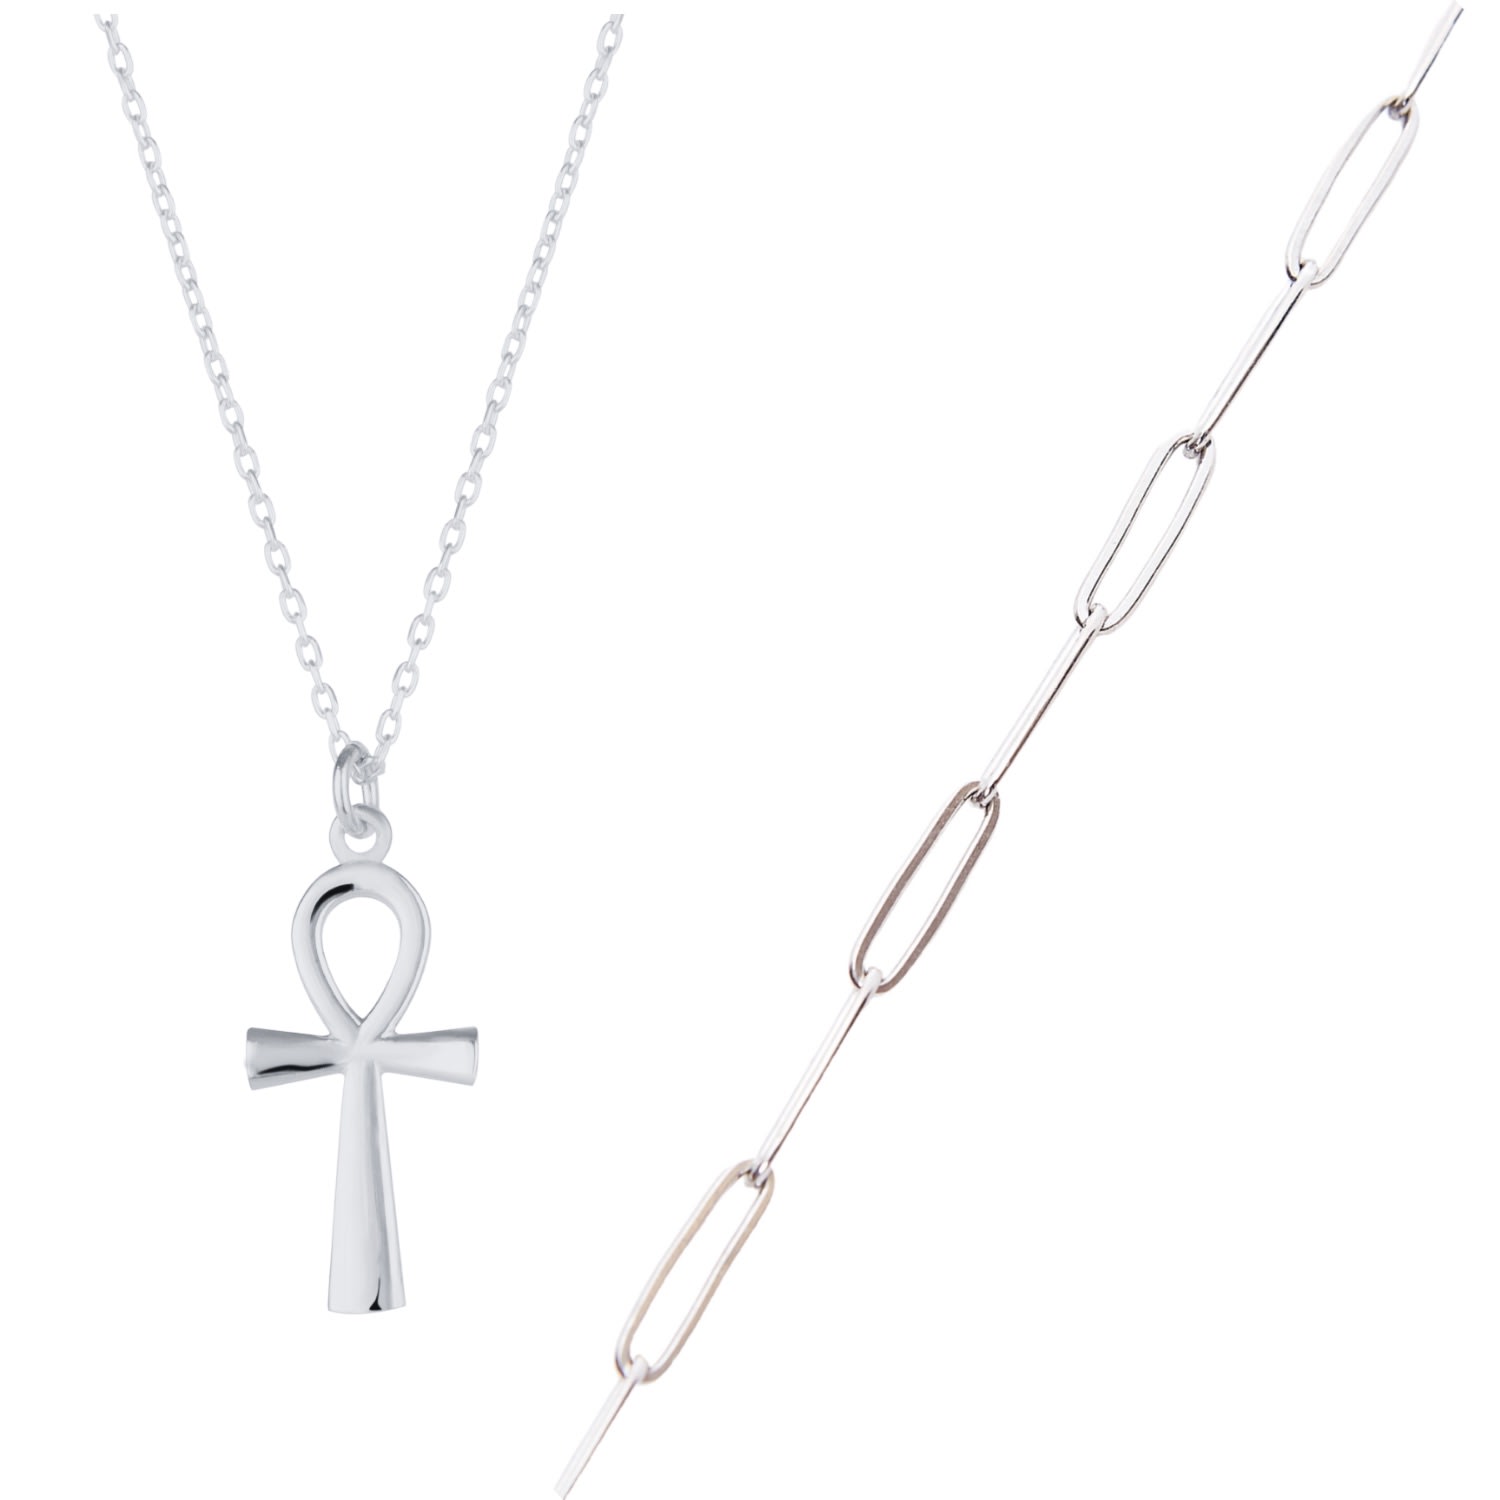 Spero London Women's Sterling Silver Egyptian Ankh & Large Rectangular Chain Necklace - Silver In Metallic